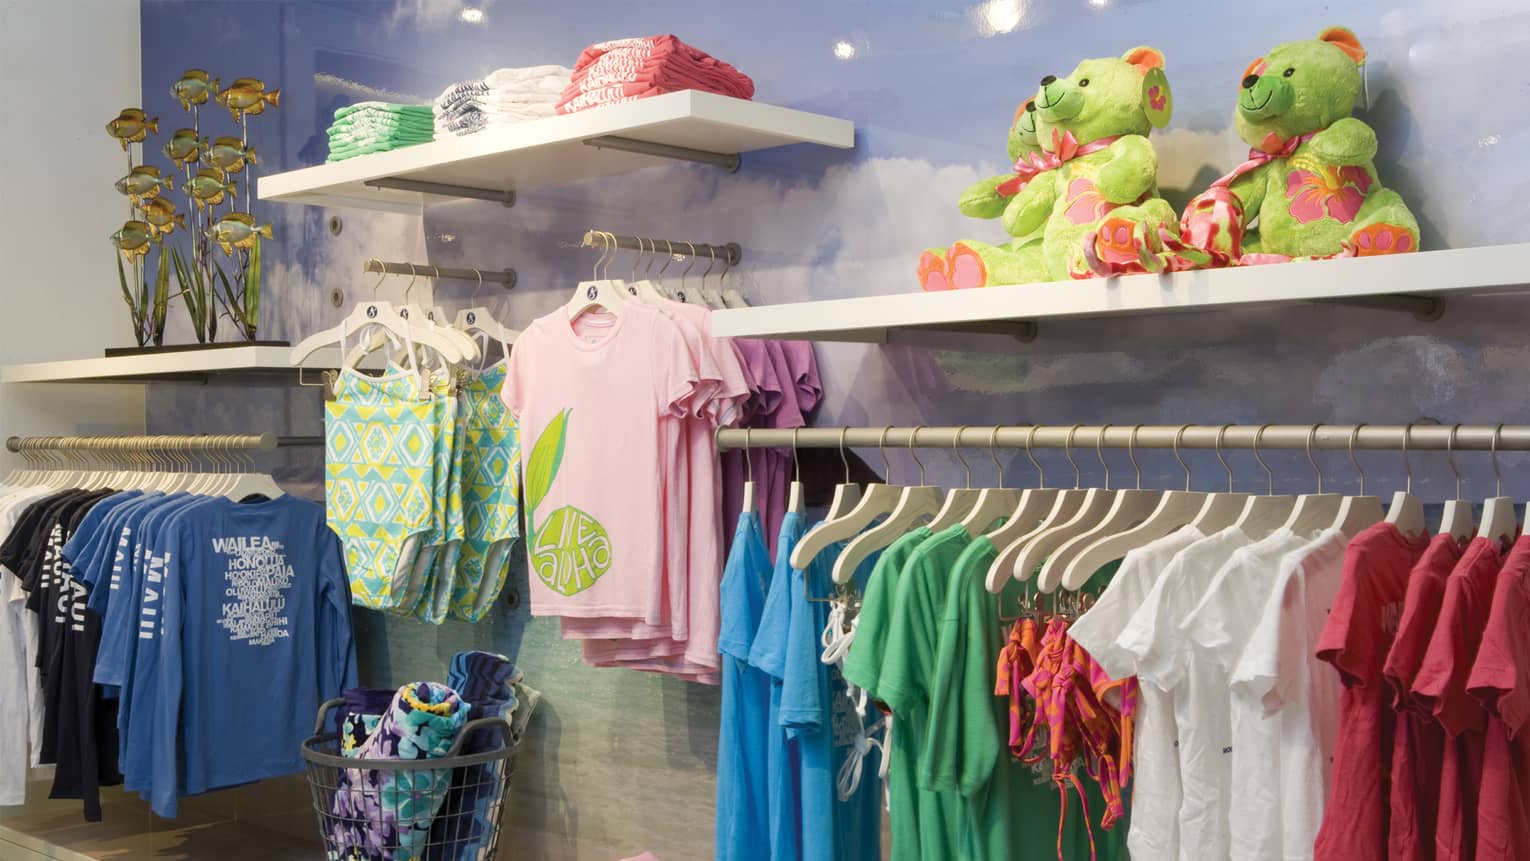 Wall of clothing boutique with racks of children's clothes on hangers, toys and towels